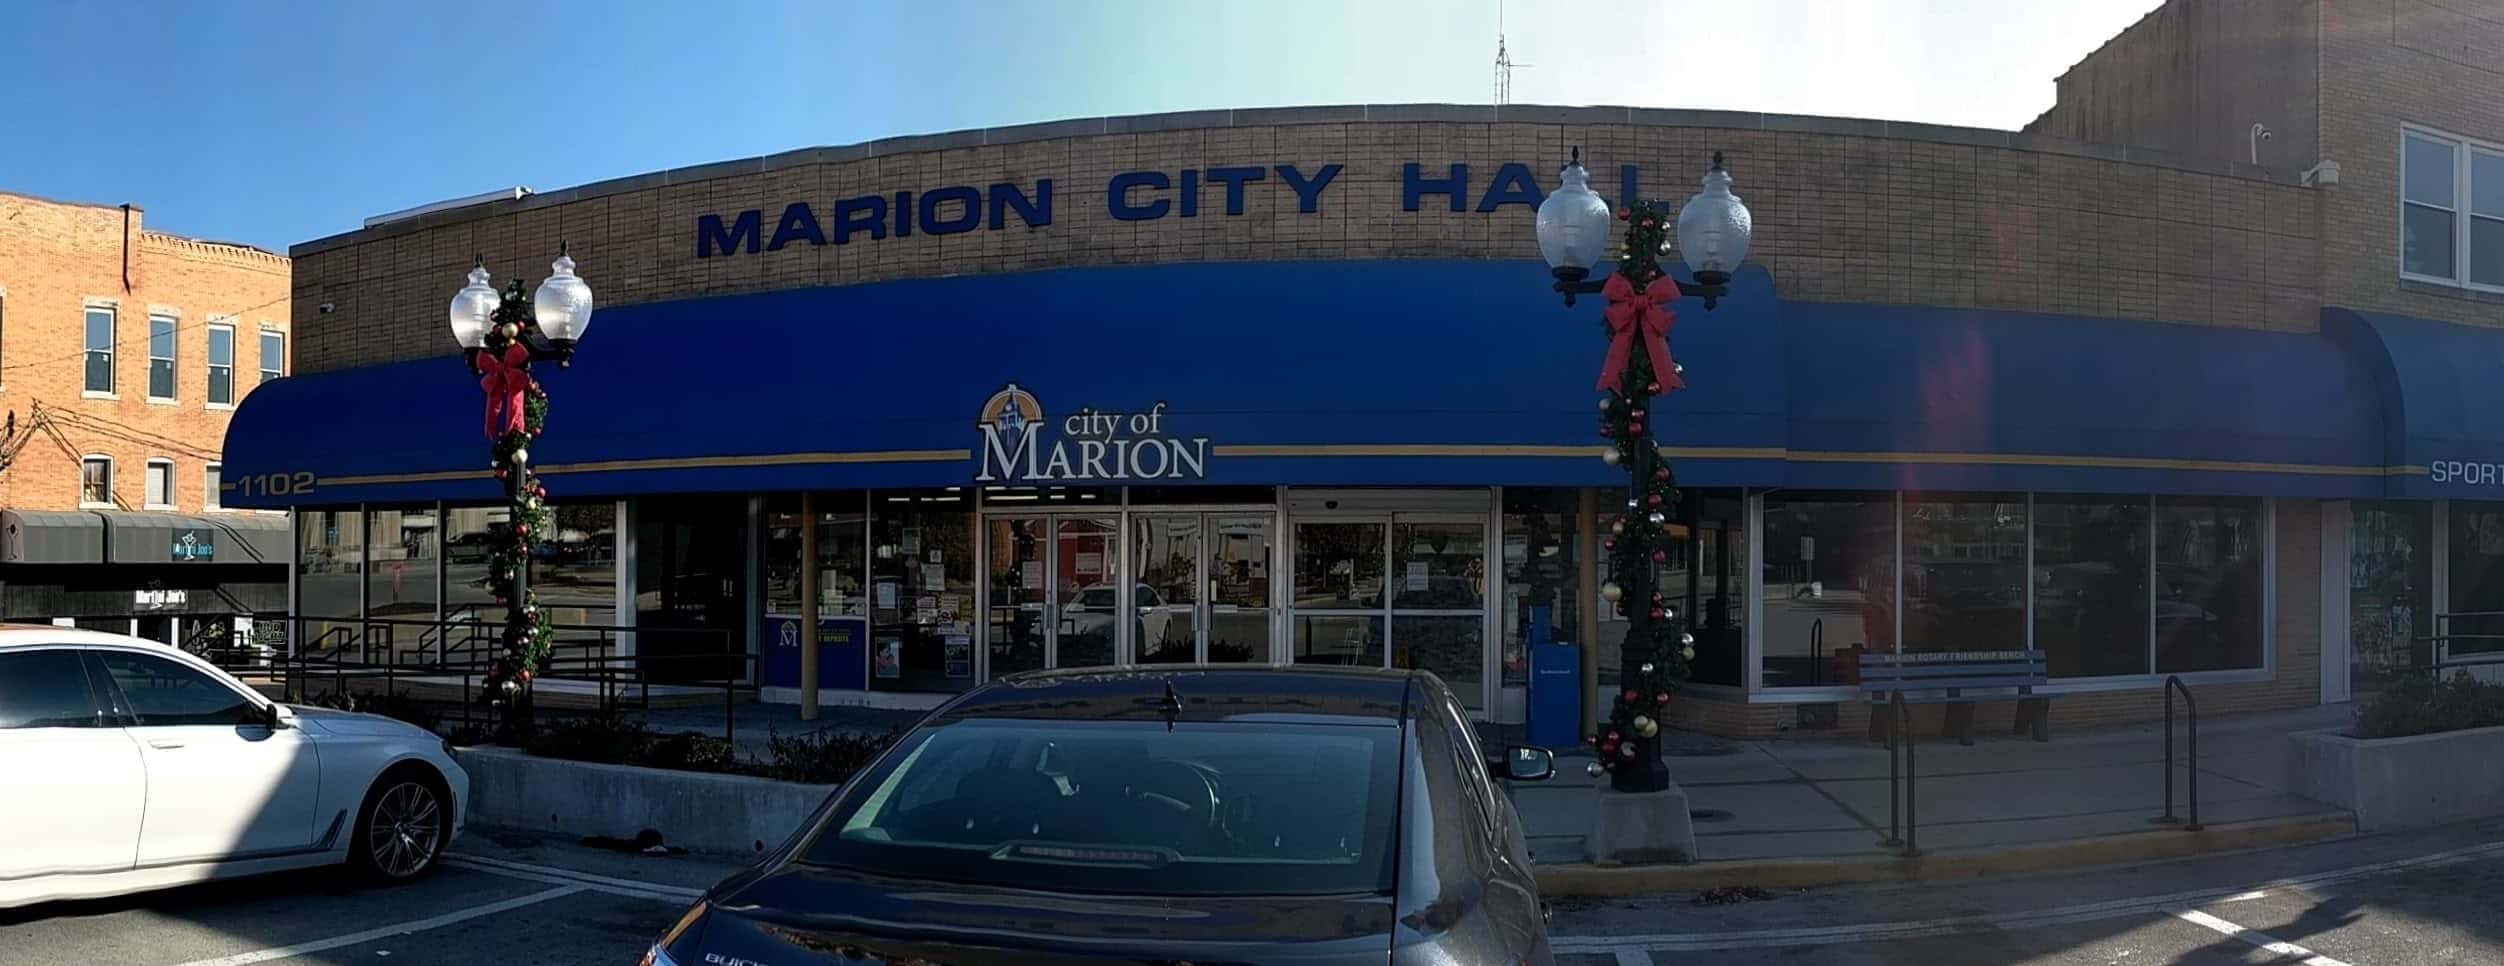 city-of-marion-cropped-jpg